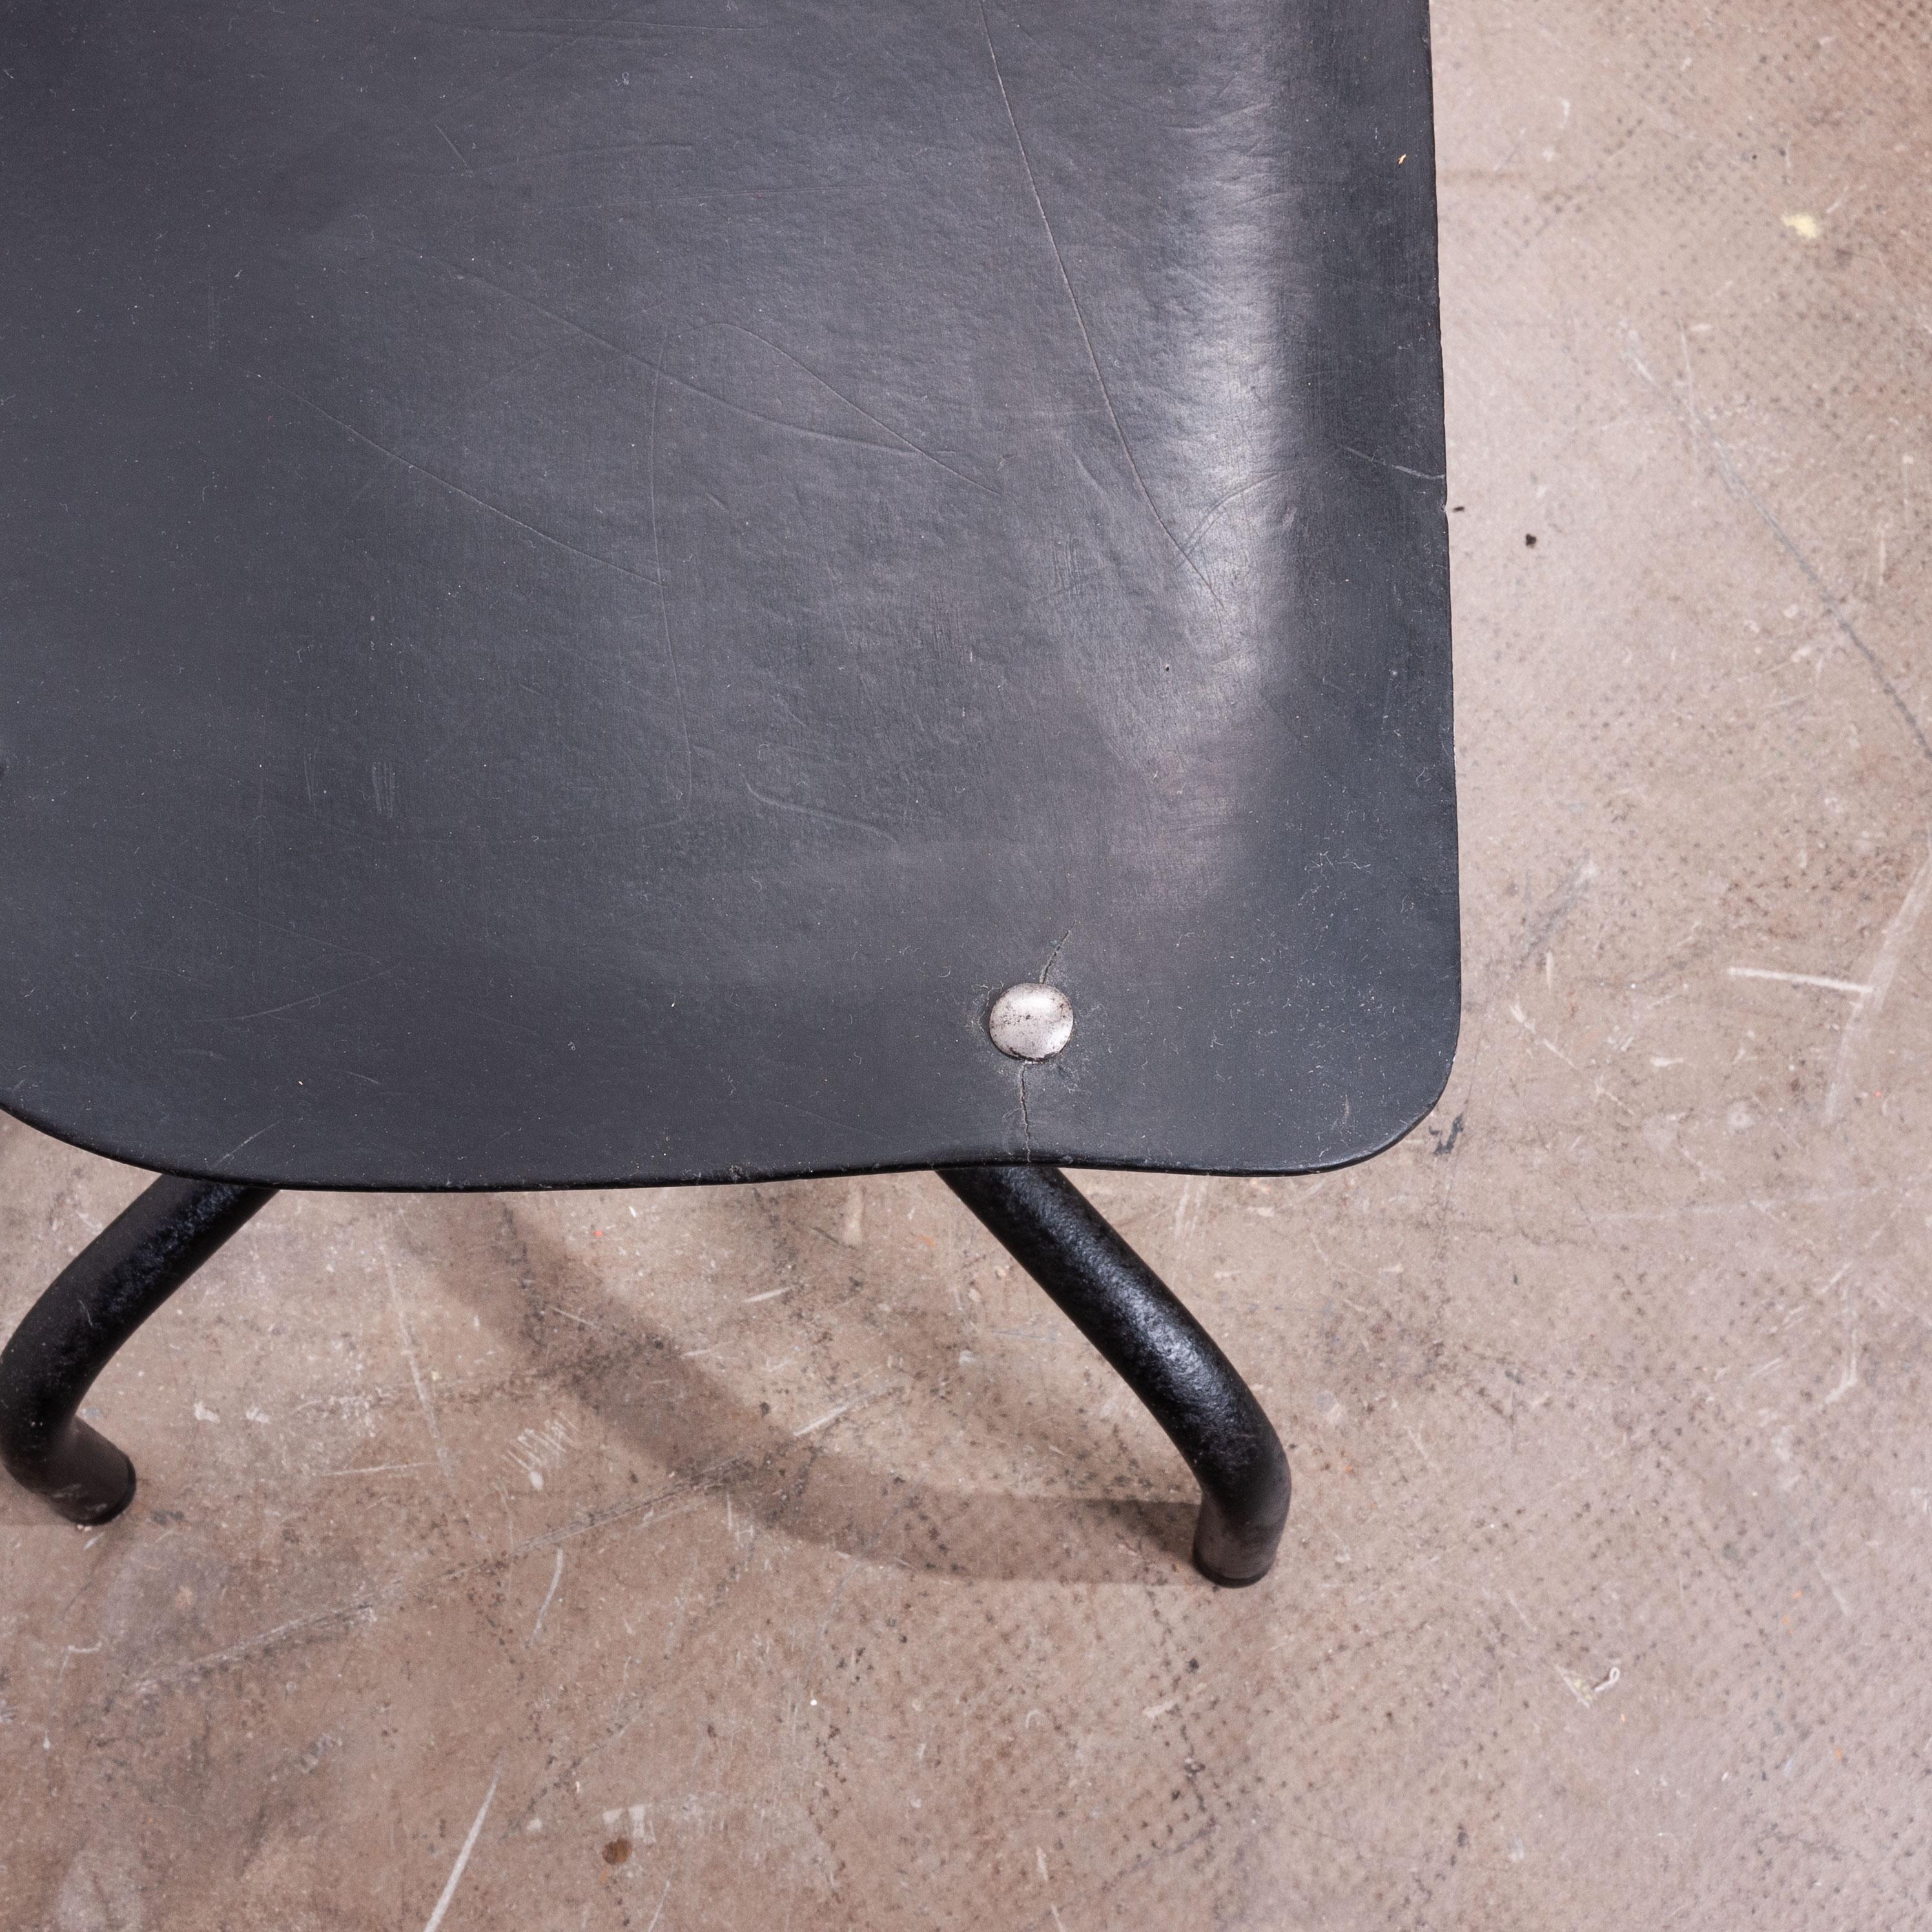 1940s vintage stunning single original Tan-Sad machinists/dining/desk/study chair in black, swivelling and height adjustable. One of our passions is the heritage of Industrial British (and other) brands and Tan-Sad is one of our all time favourites.